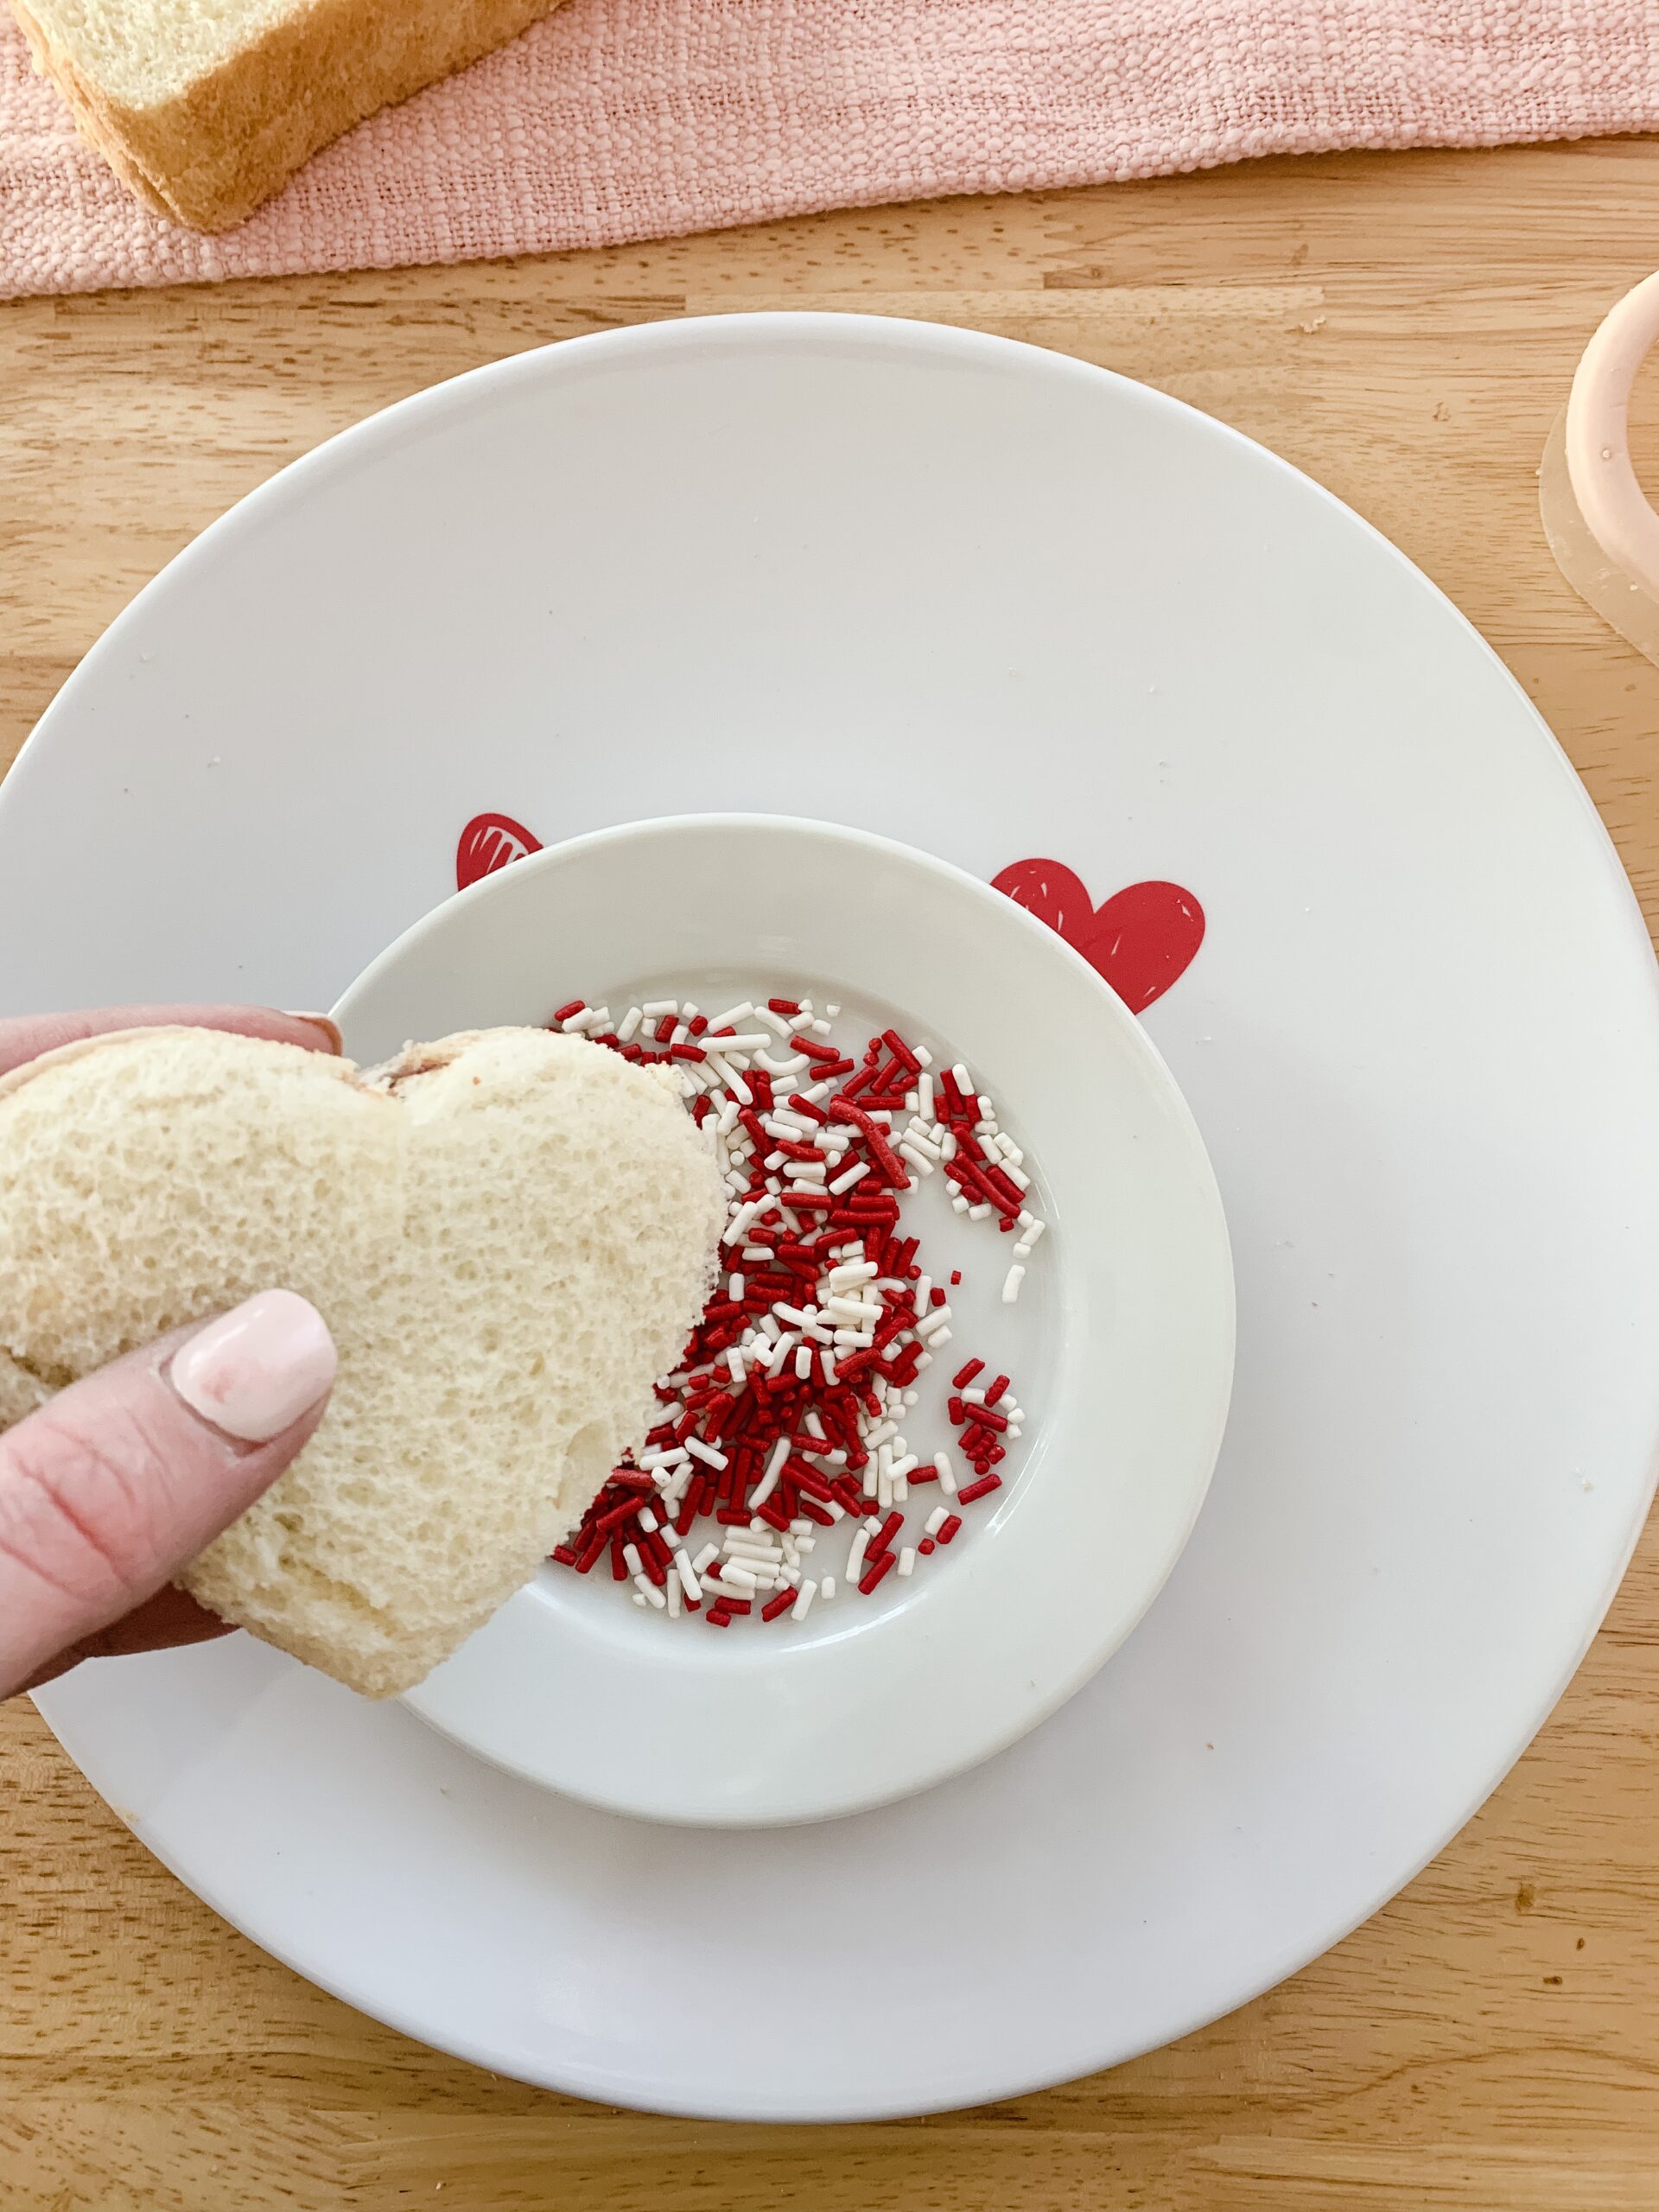 dipping a sandwich into red and white sprinkles for Valentine's Peanut Butter and Jelly